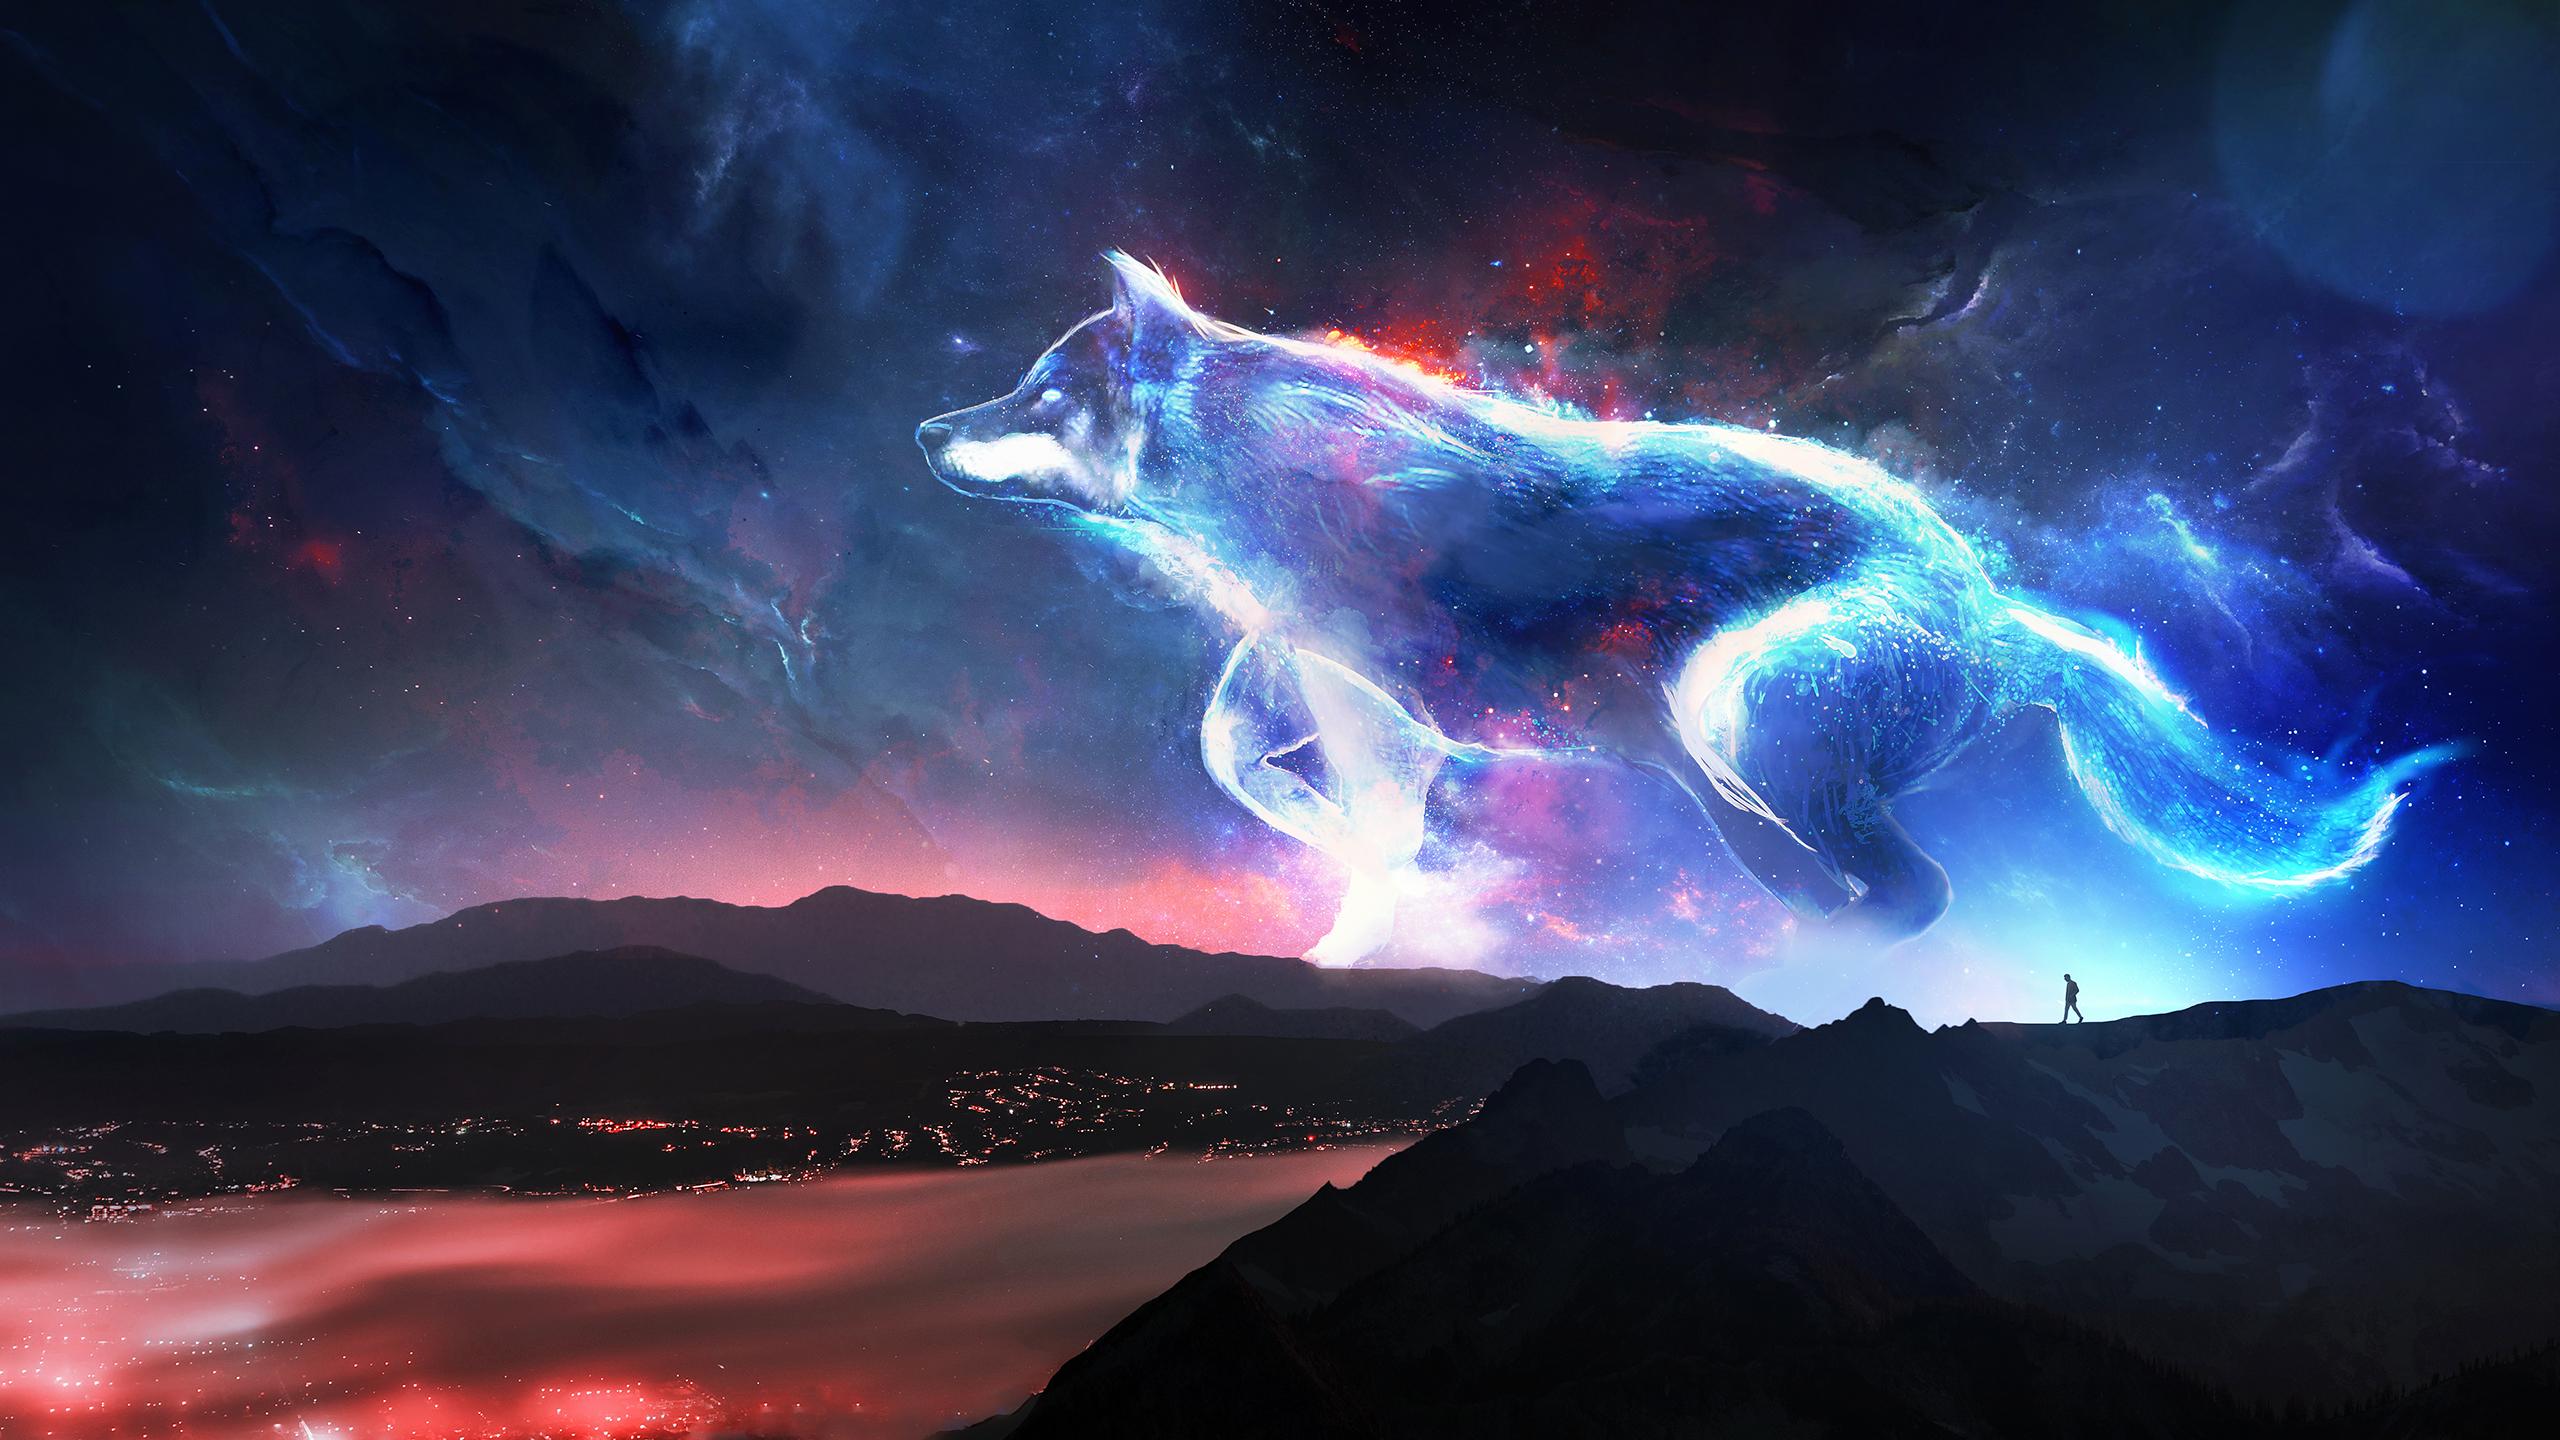 Epic Wolf Wallpapers posted by Ethan Sellers.